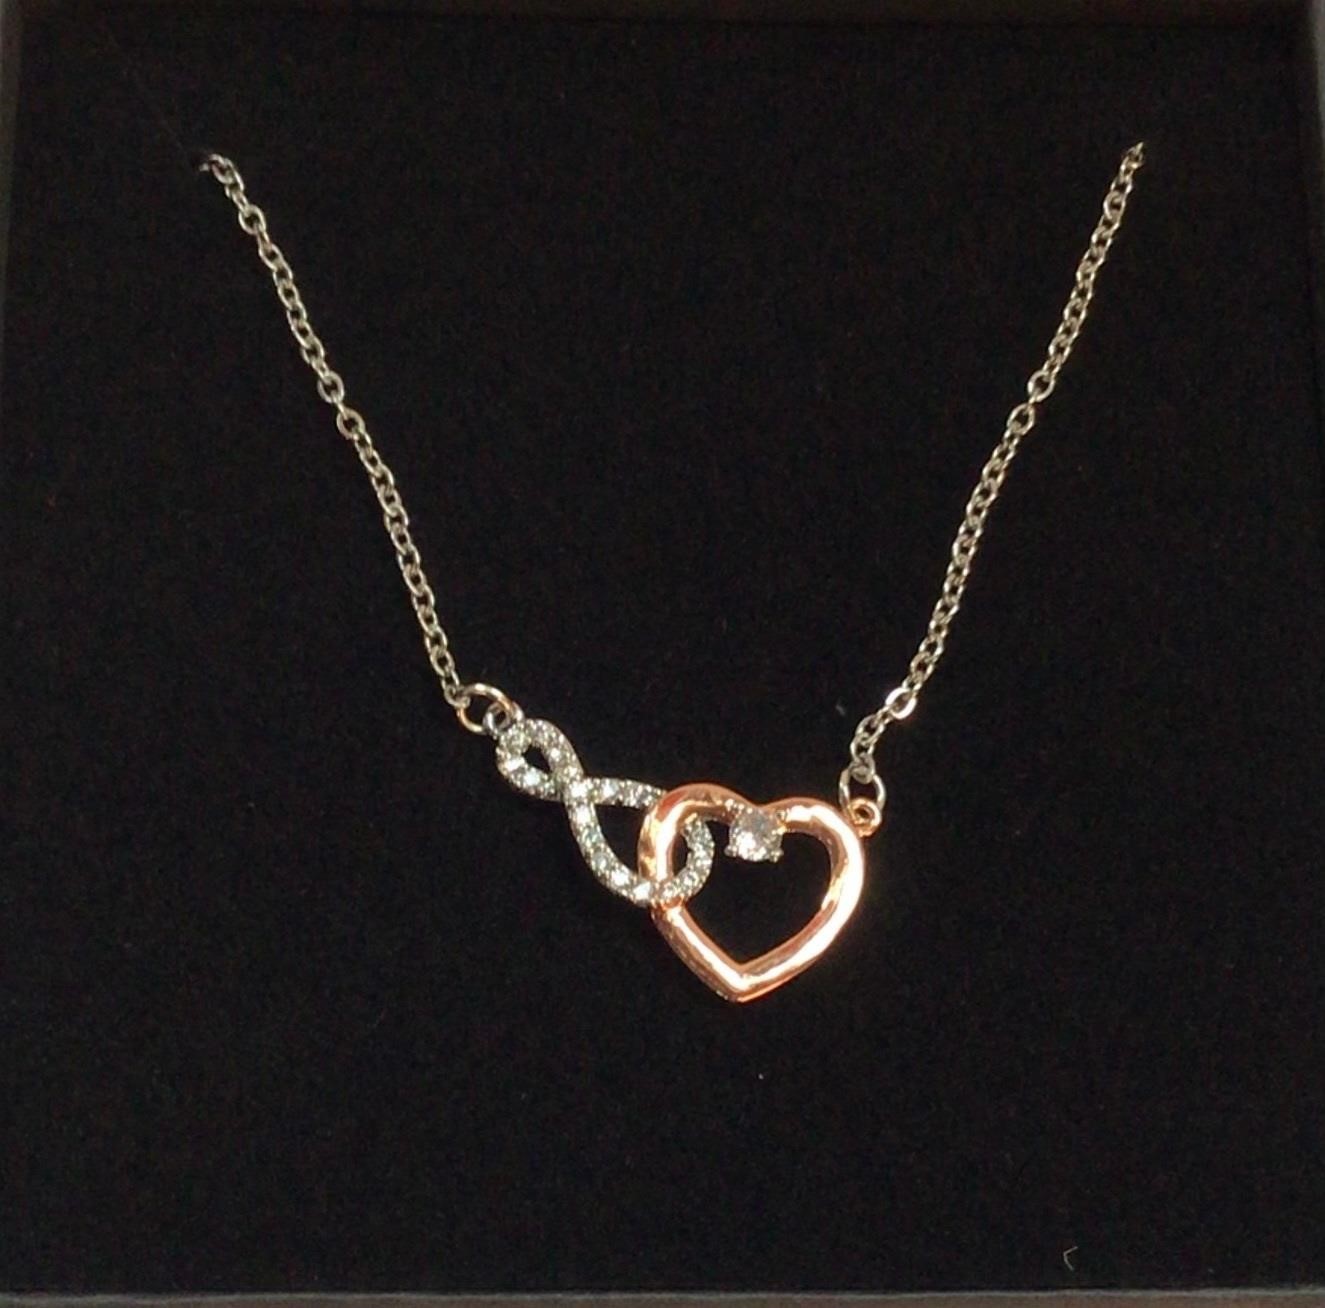 Gorgeous infinity connected to a rose gold heart